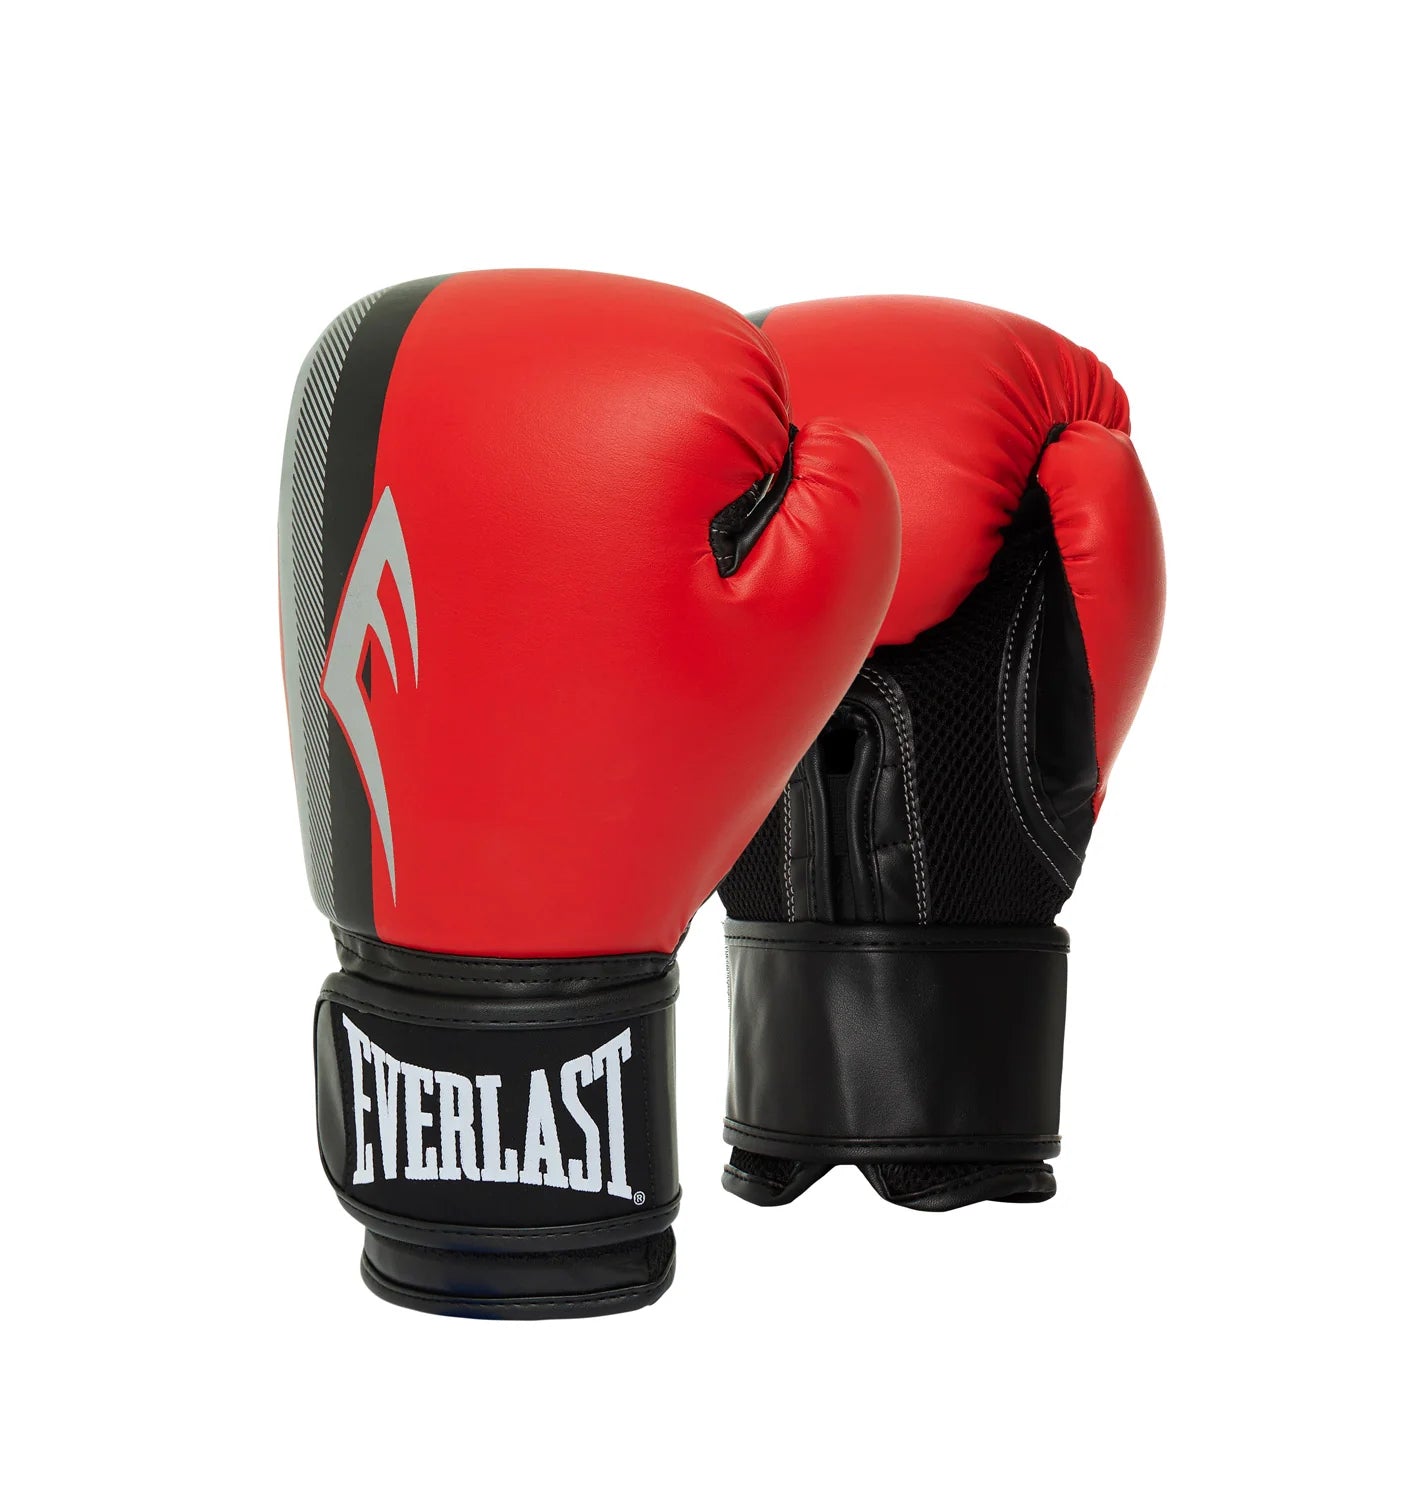 Everlast Pro Style Power Boxing Gloves - Red / Black